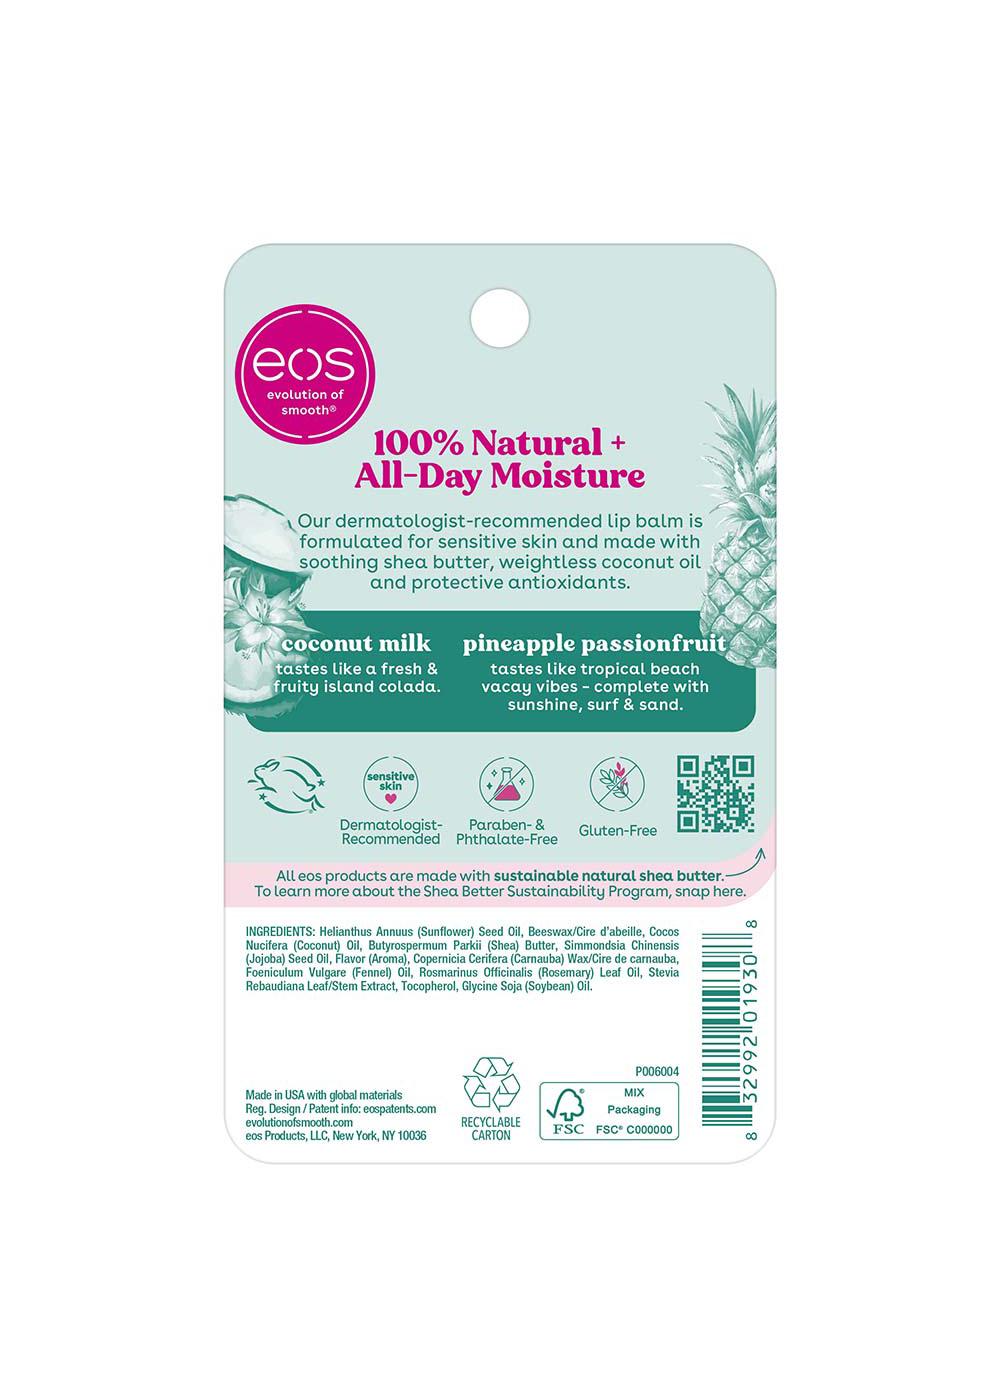 eos 100% Natural Smooth Lip Balm - Coconut Milk Pineapple Passionfruit; image 2 of 2